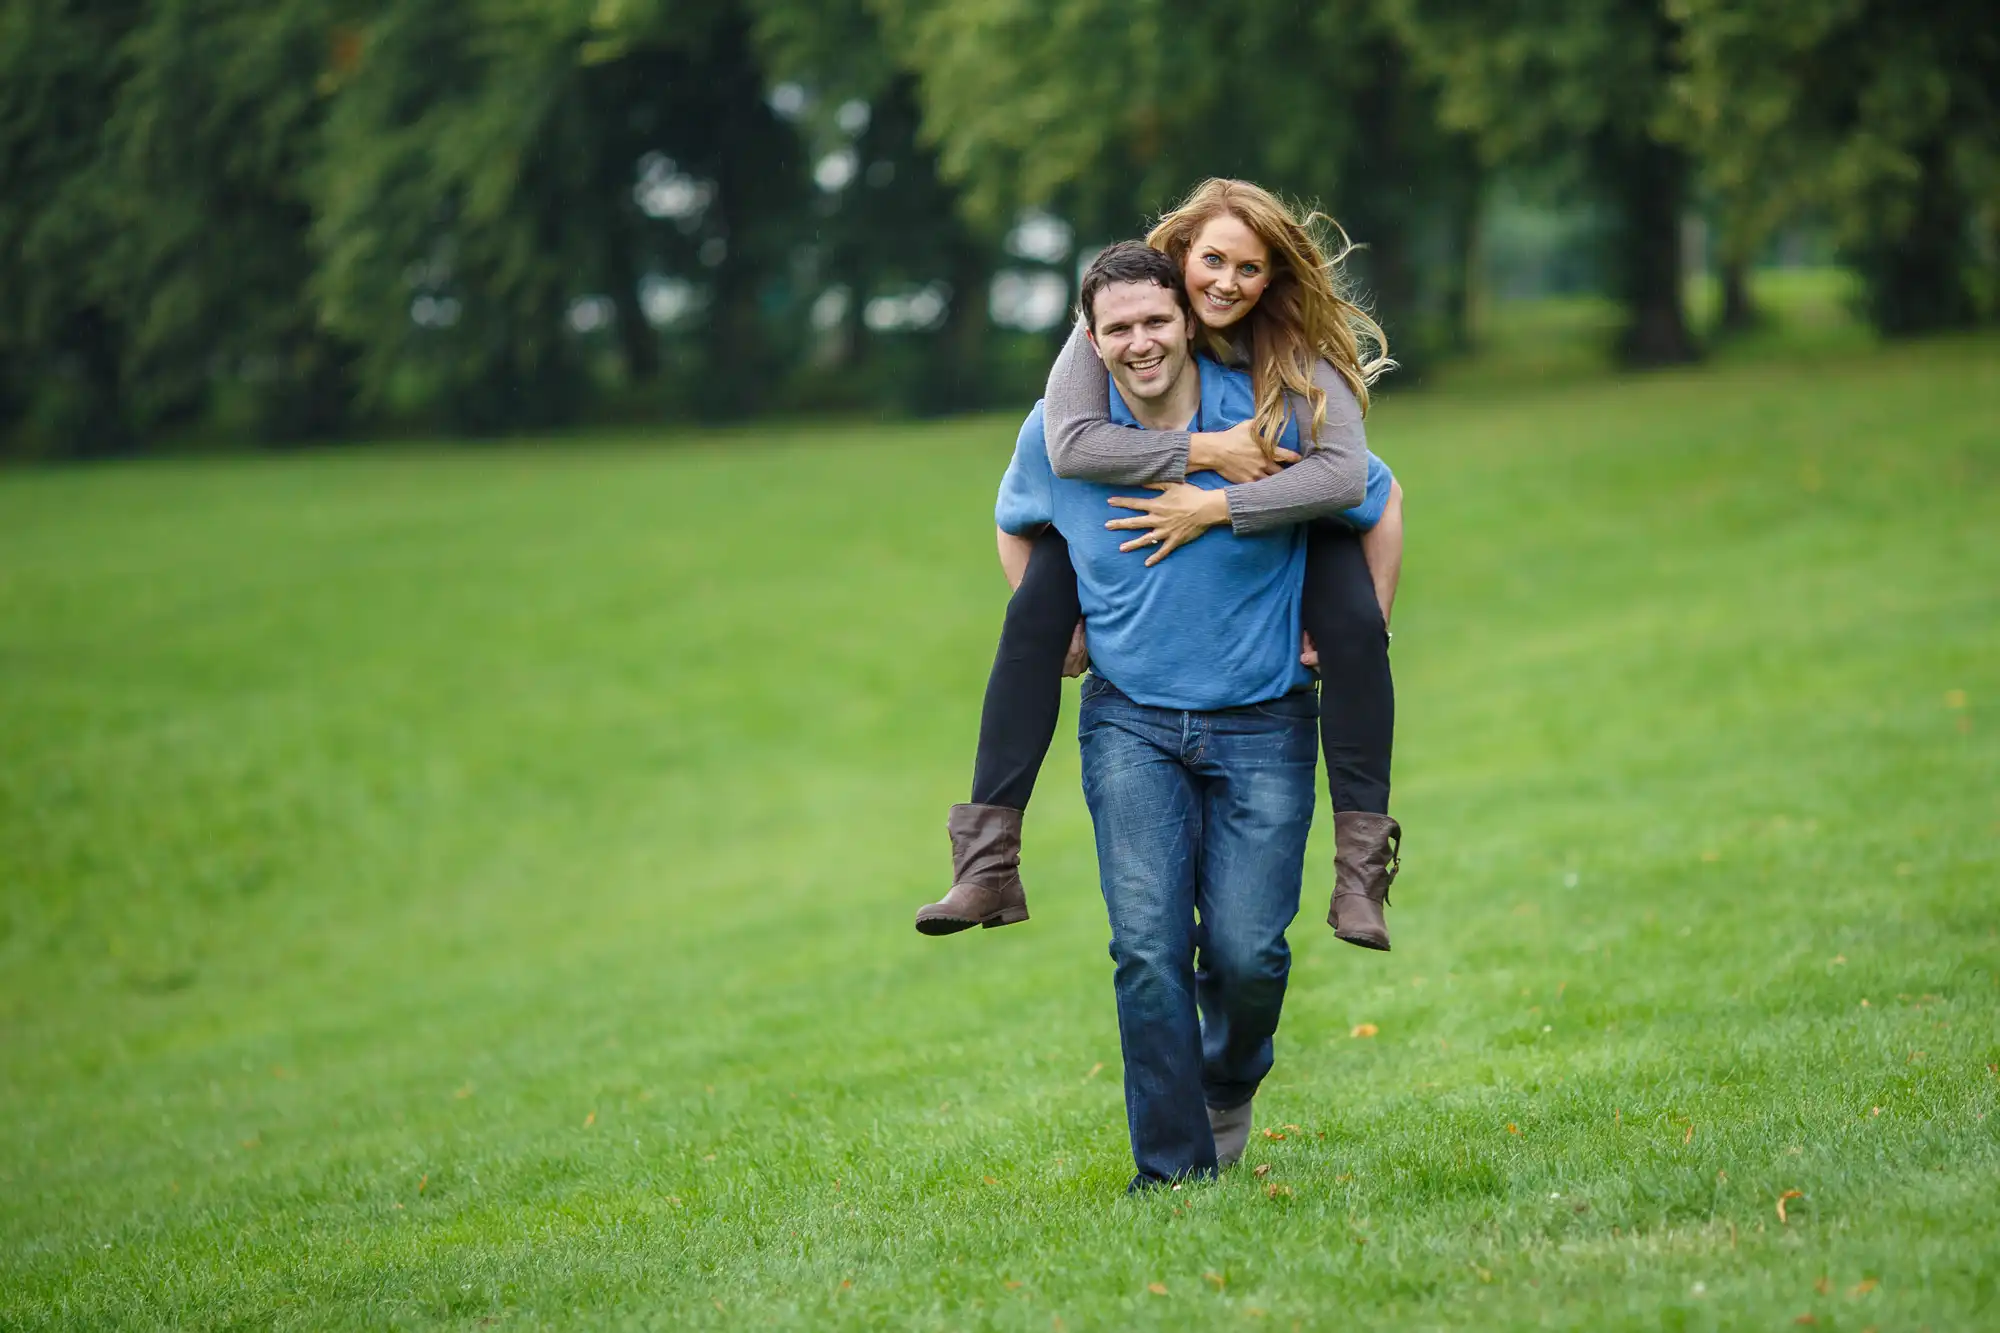 A man giving a woman a piggyback ride, both smiling, in a lush green park.